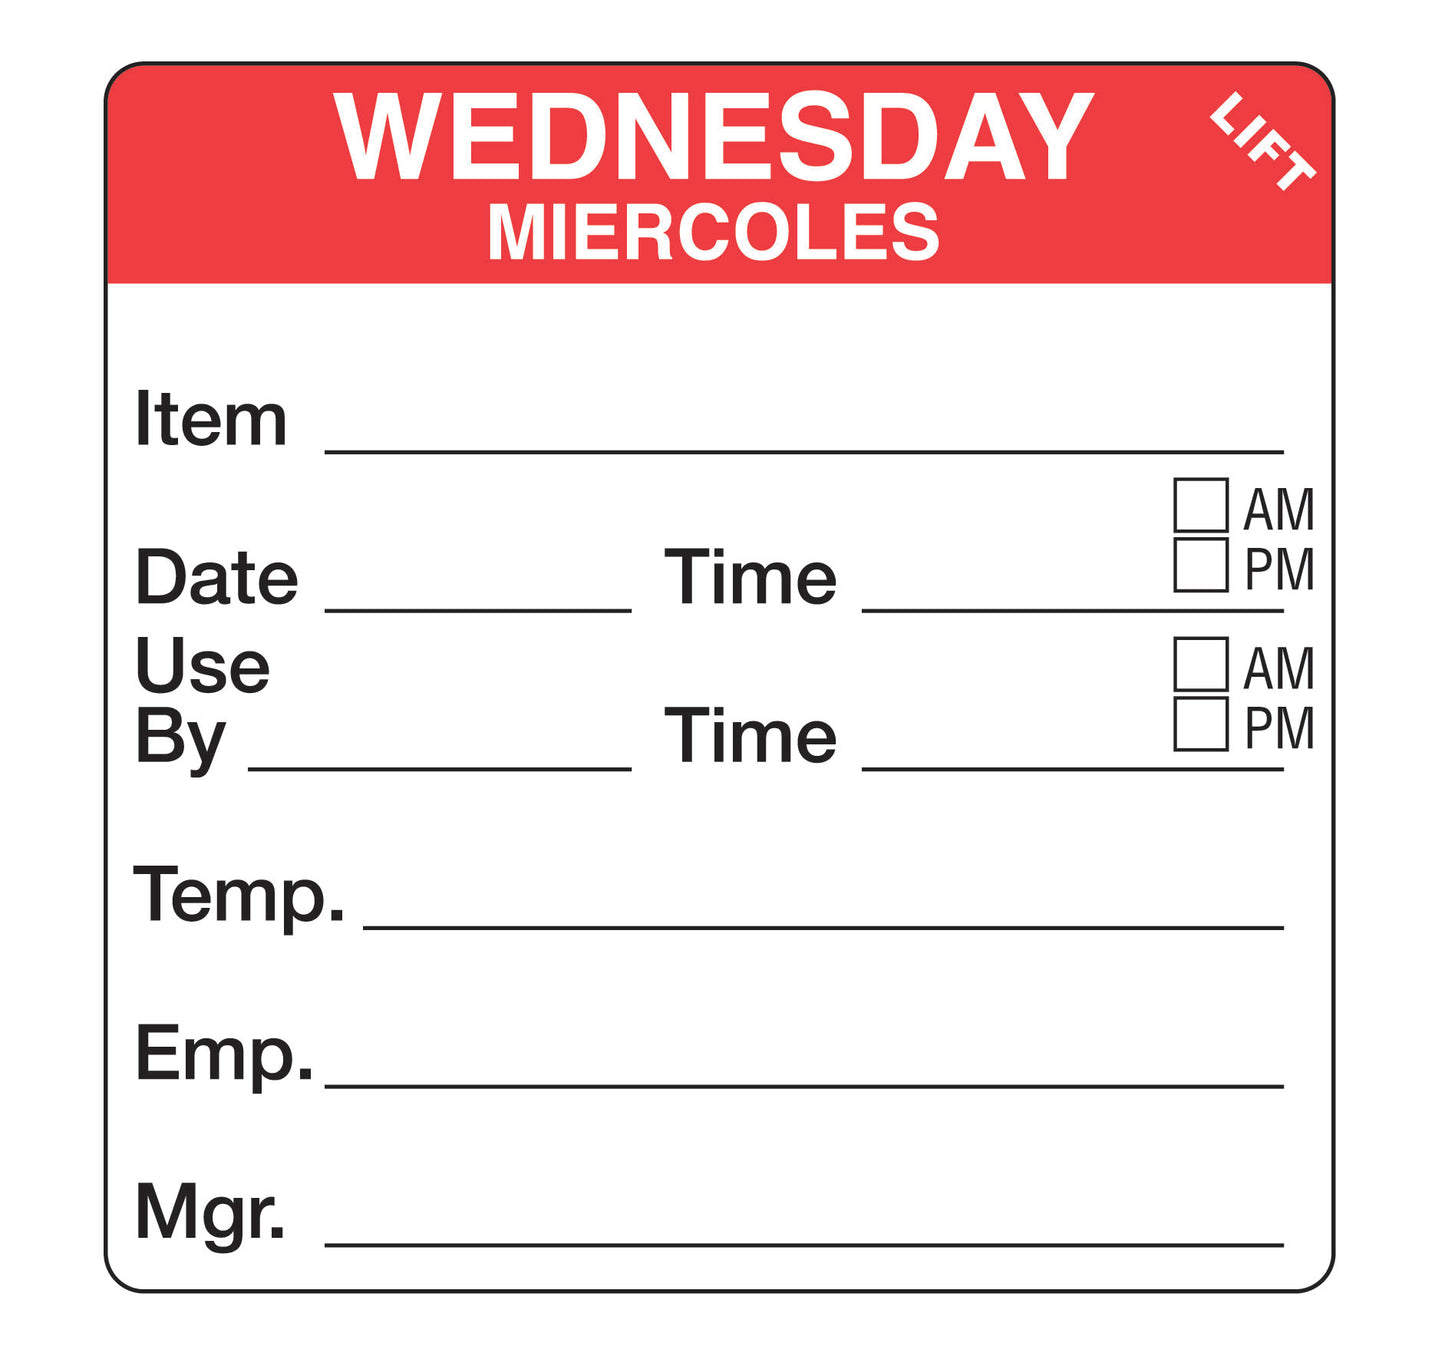 Wednesday - Miercoles 2" x 2" Durable Day of the Week Shelf Life Date Label